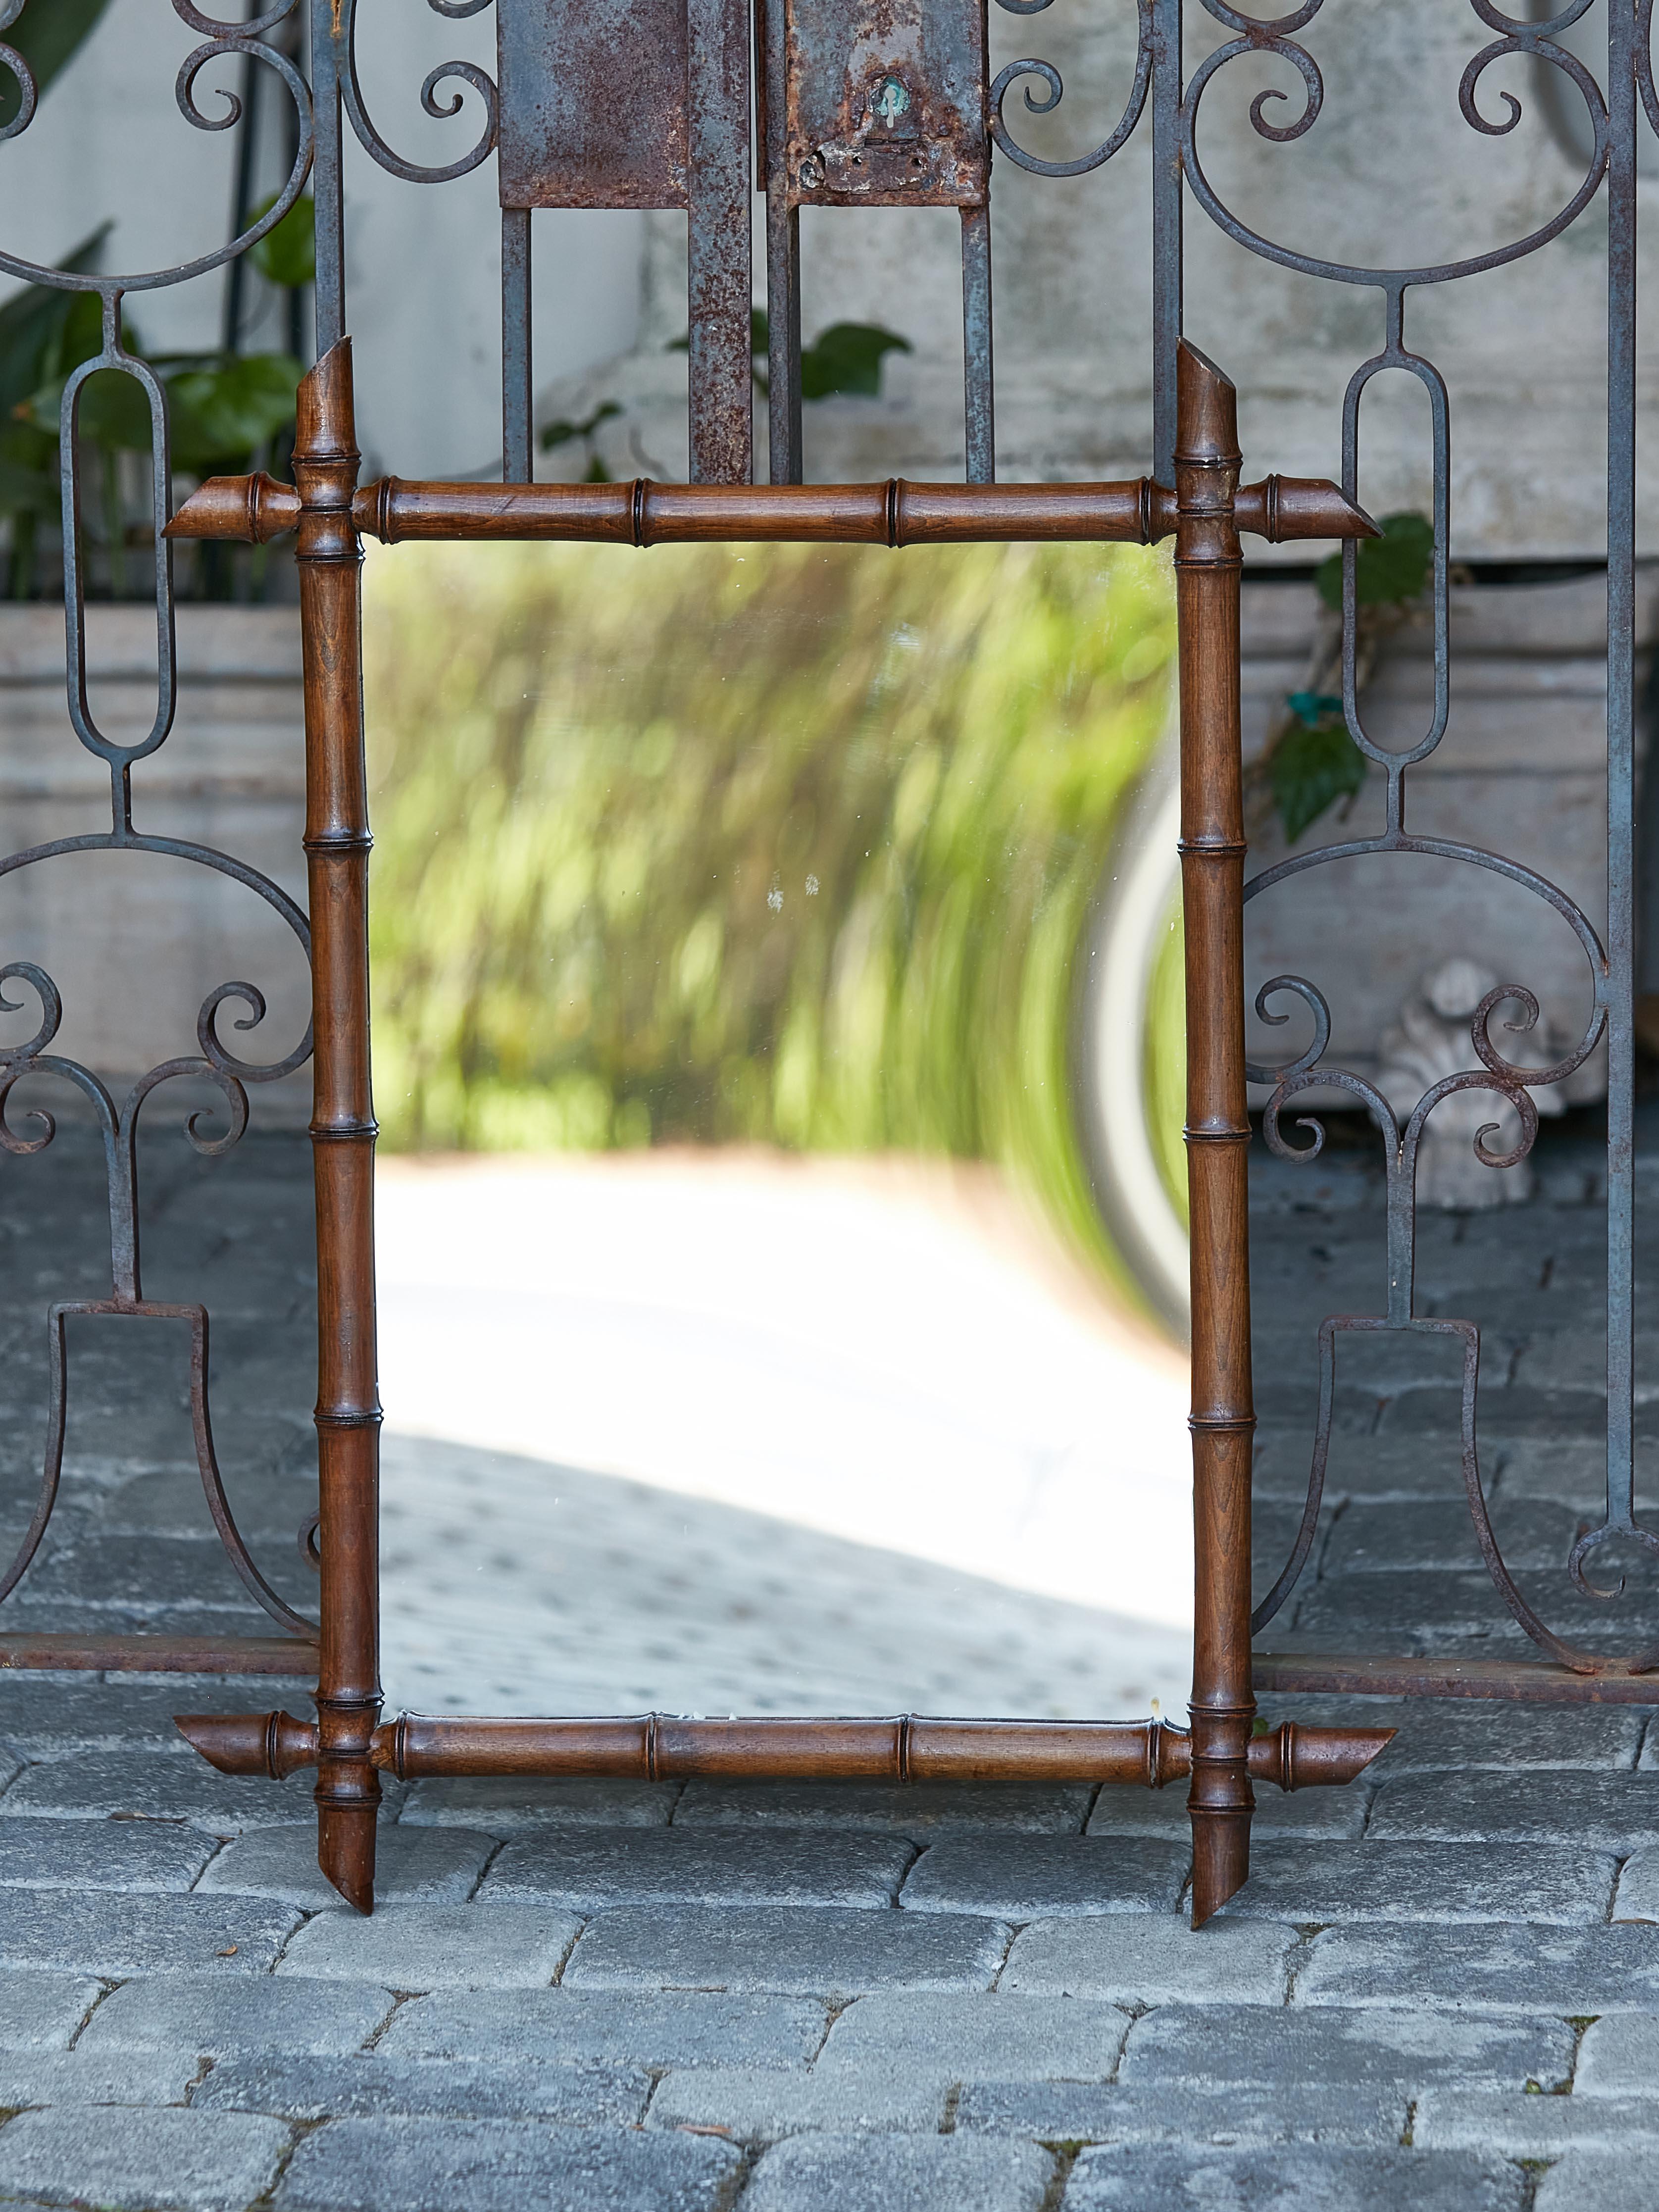 A French turn of the century faux-bamboo mirror from circa 1900 with intersecting corners, slanted accents and dark brown patina. Introducing a French Turn of the Century faux-bamboo mirror that effortlessly fuses rustic charm with elegant artistry.